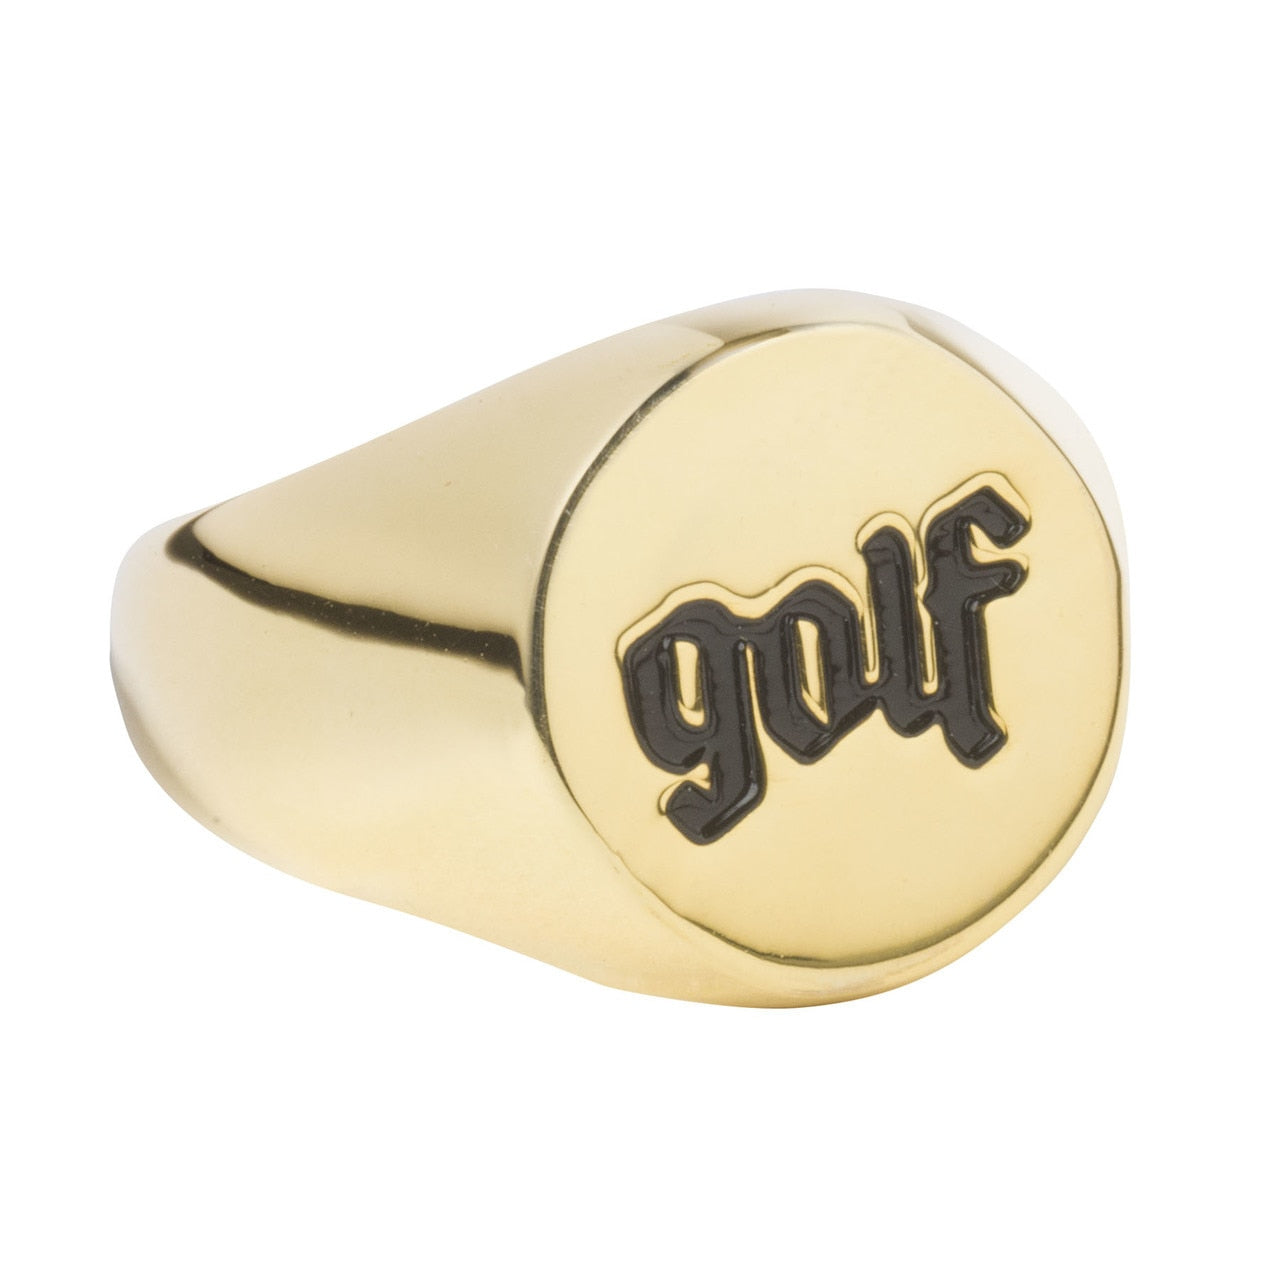 OLDE GOLF RING by GOLF WANG